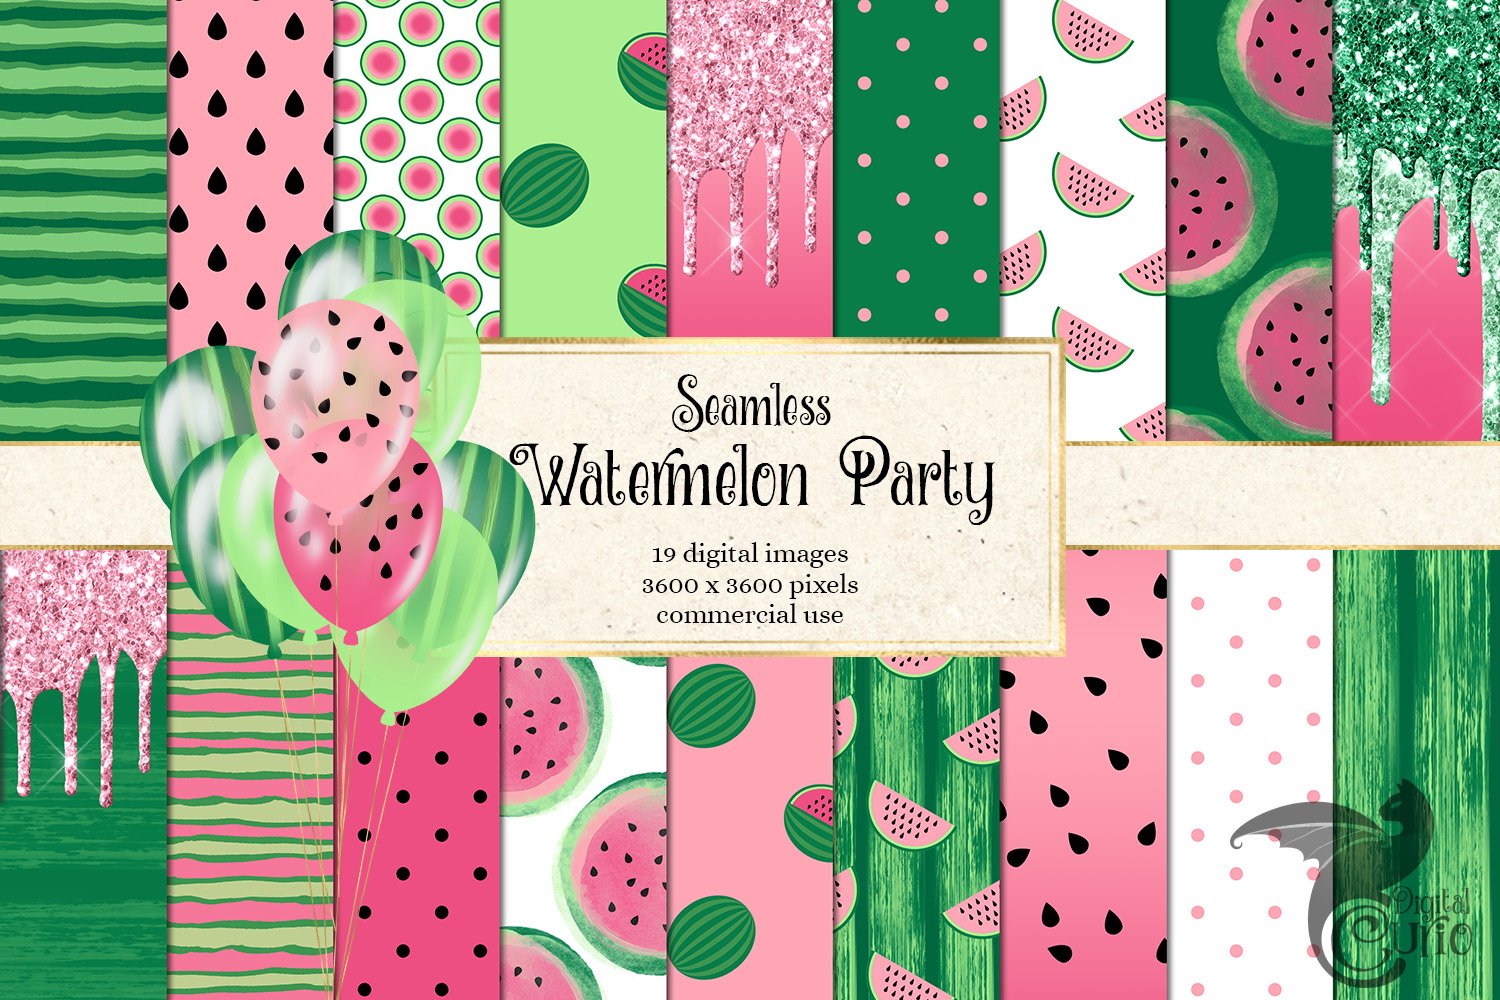 Cover image of Watermelon Party Digital Paper.